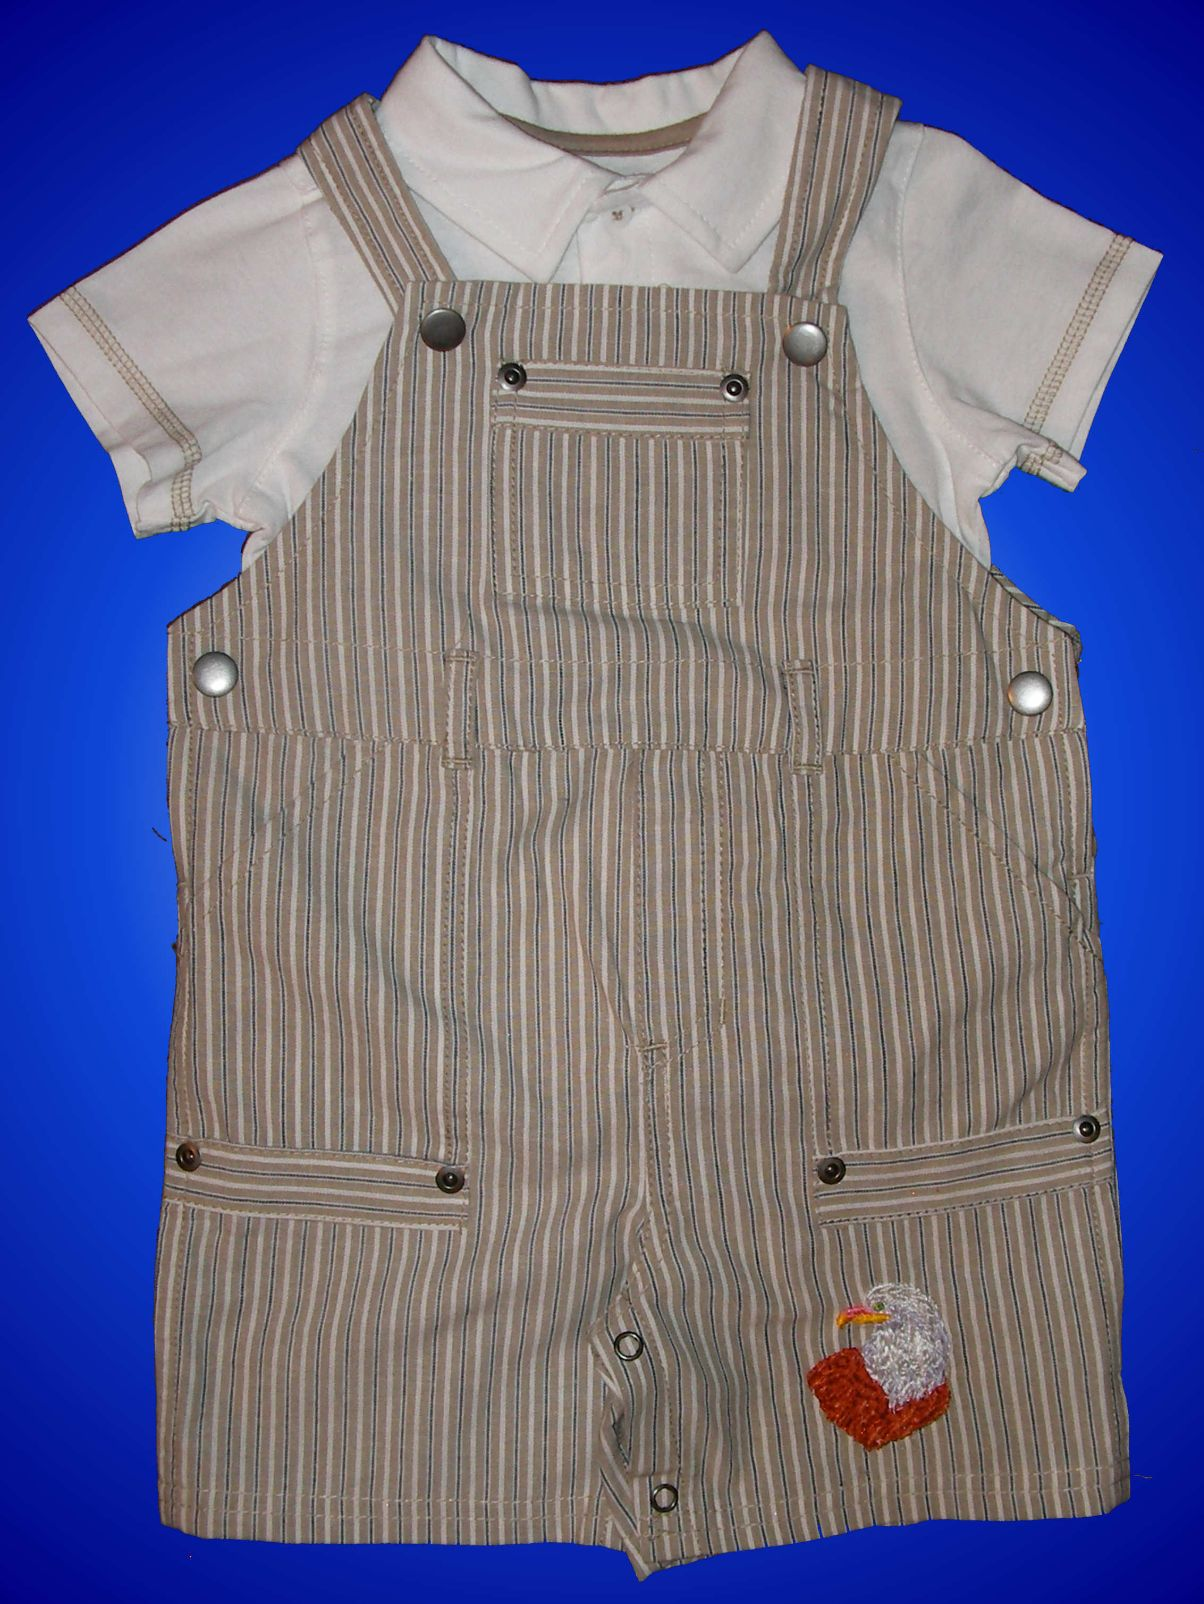 Machine Embroidered Eagle Boys Shortall - Romper - Playsuit - Overall - Dungaree FREE Shipping